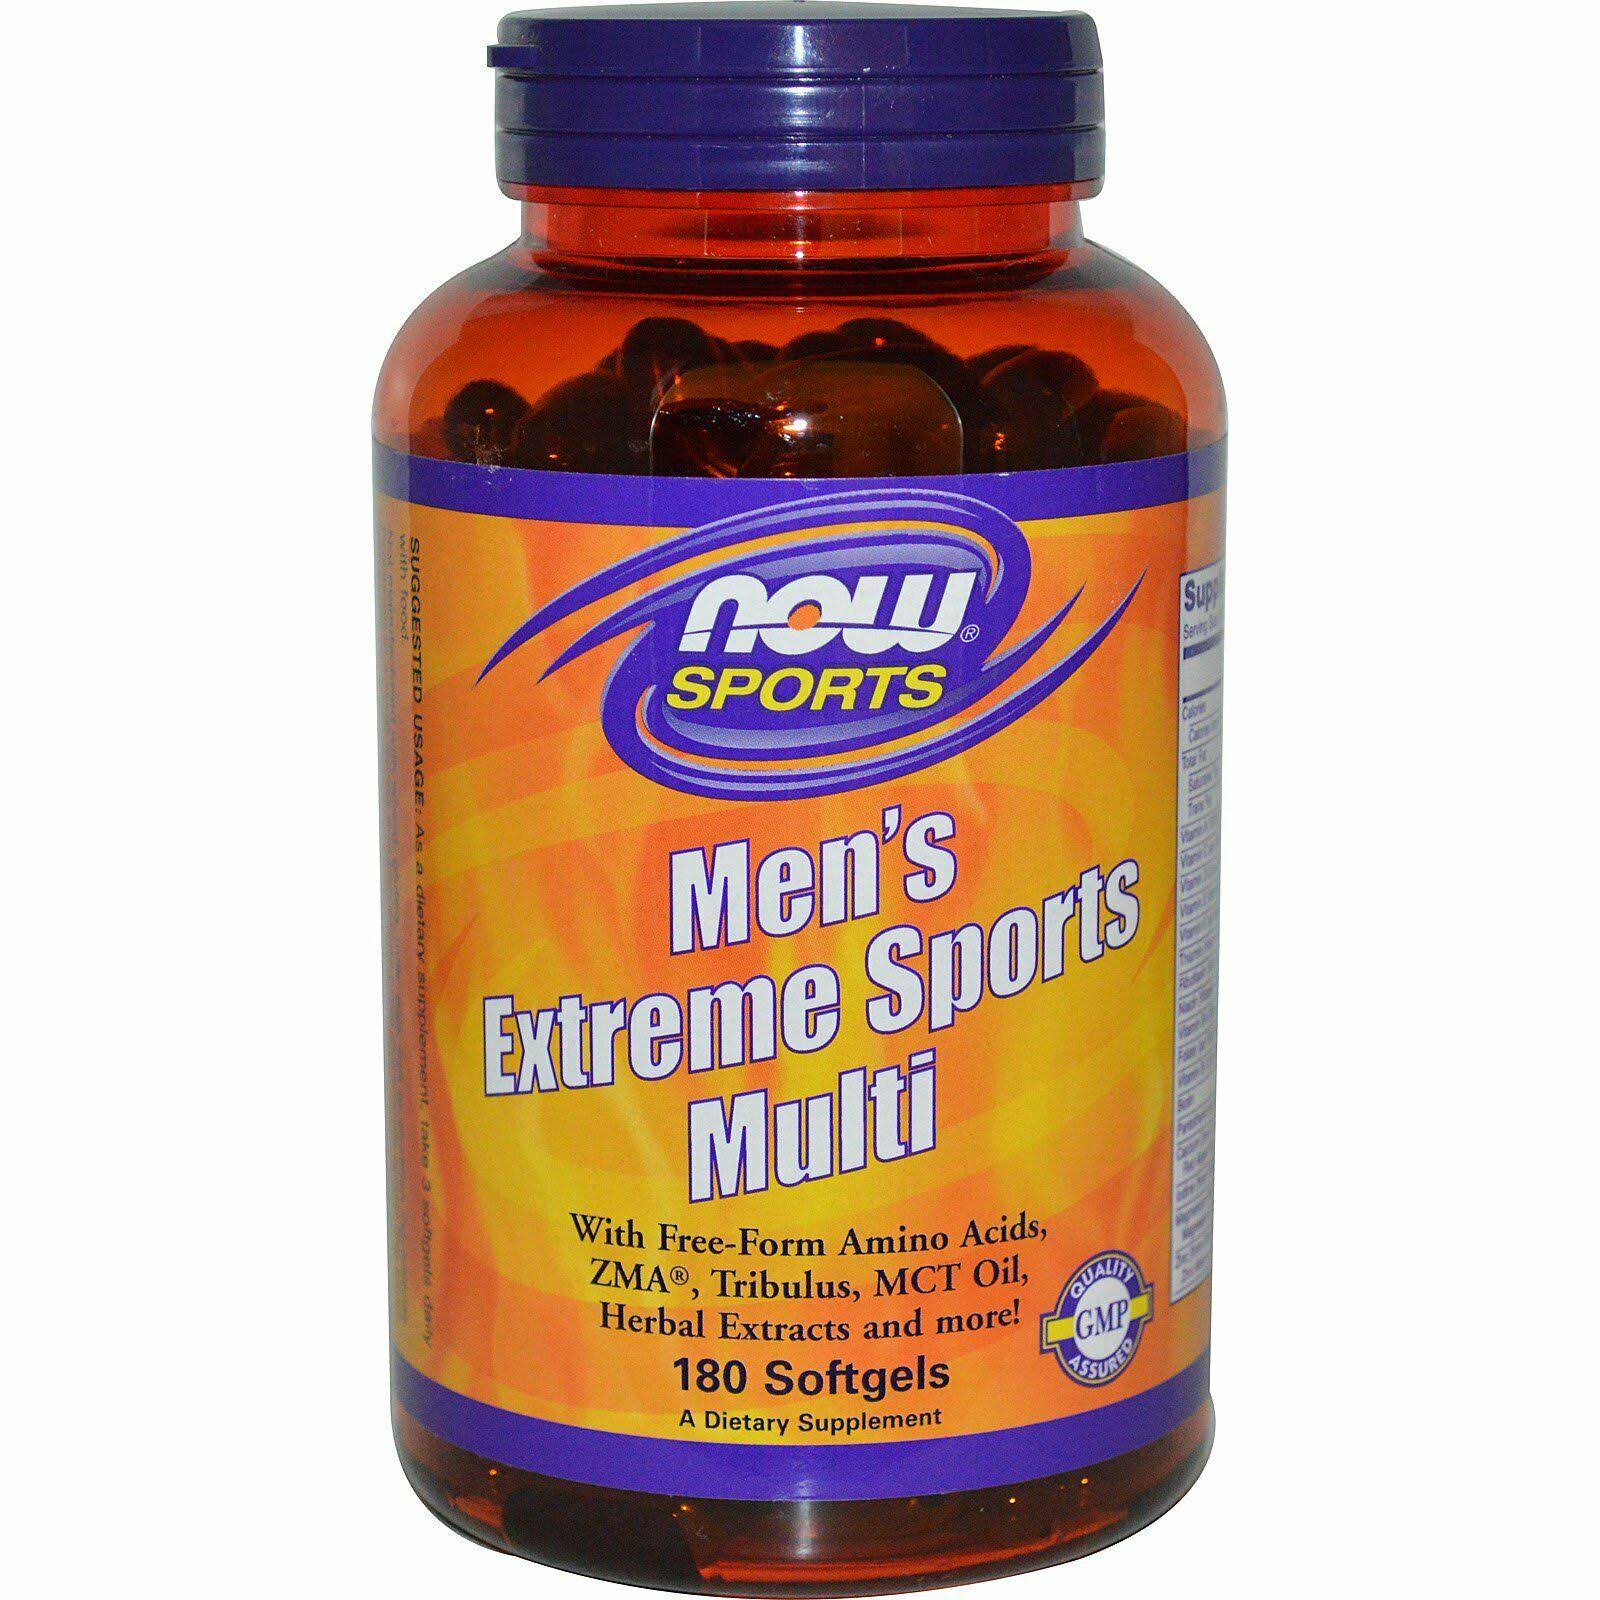 Now Foods Men's Extreme Sports Multivitamin - 180 Softgels